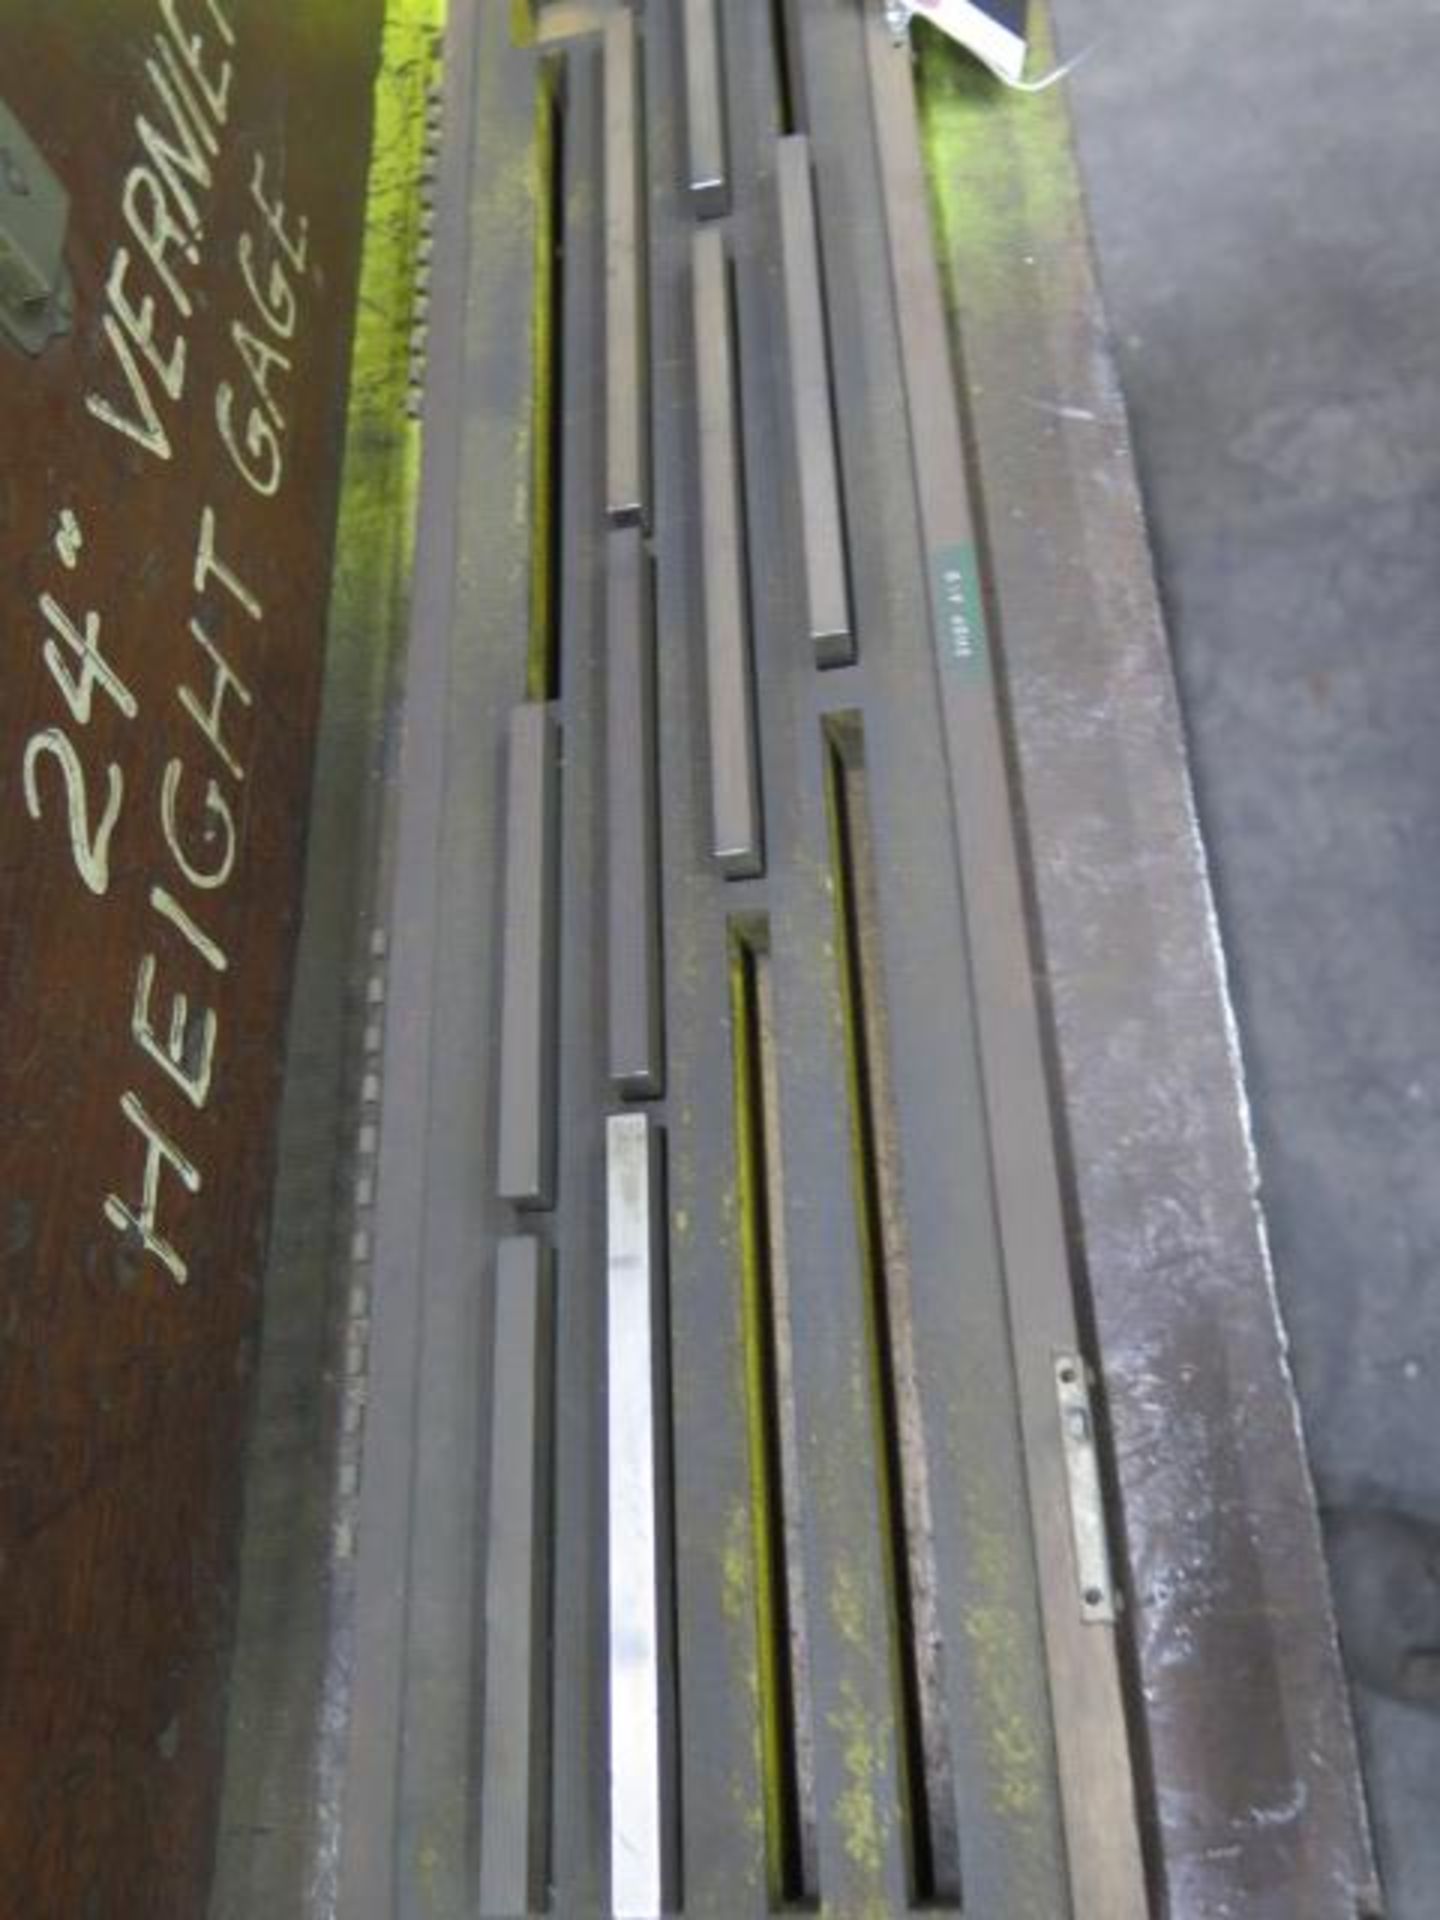 Long Gage Blocks (SOLD AS-IS - NO WARRANTY) - Image 3 of 3